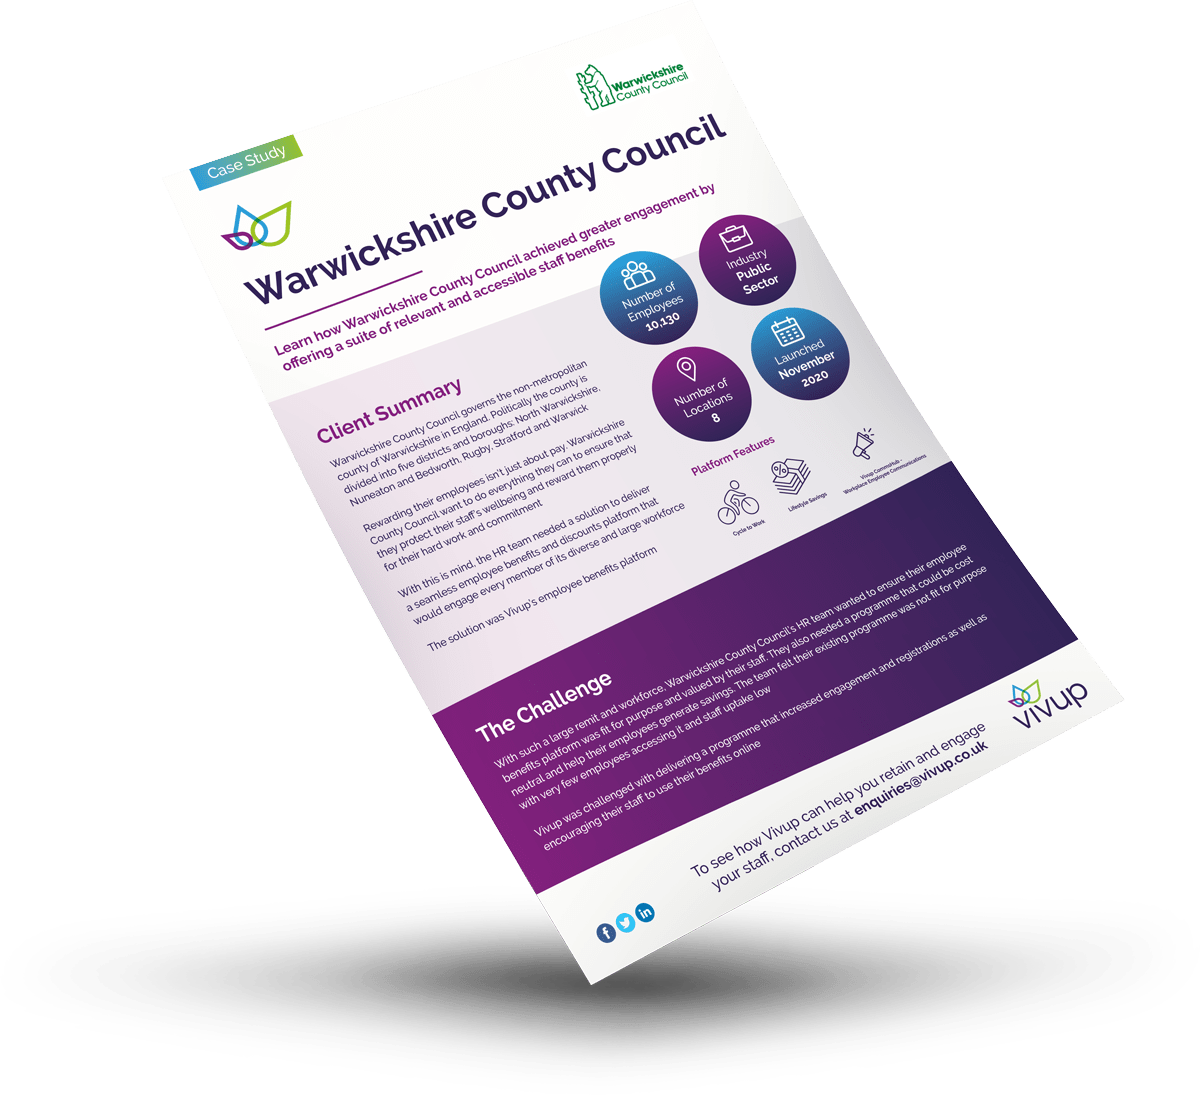 Warwickshire County Council Client Case Study Sheet